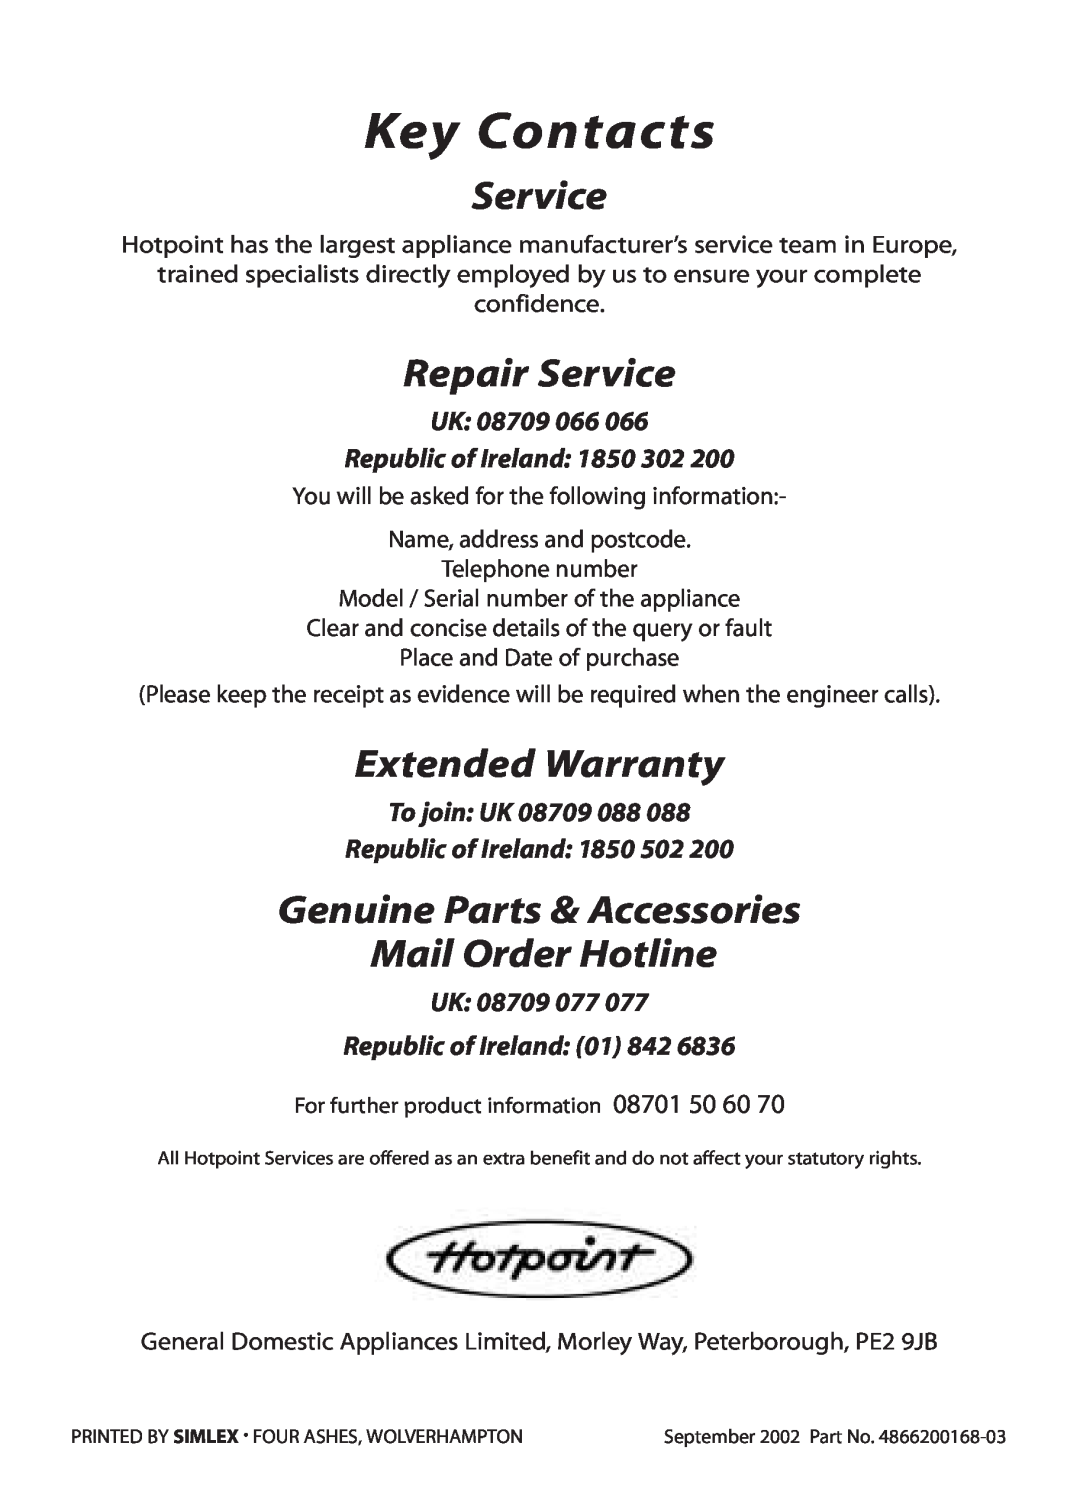 Hotpoint BU82, BU71 Key Contacts, Repair Service, Extended Warranty, Genuine Parts & Accessories Mail Order Hotline 